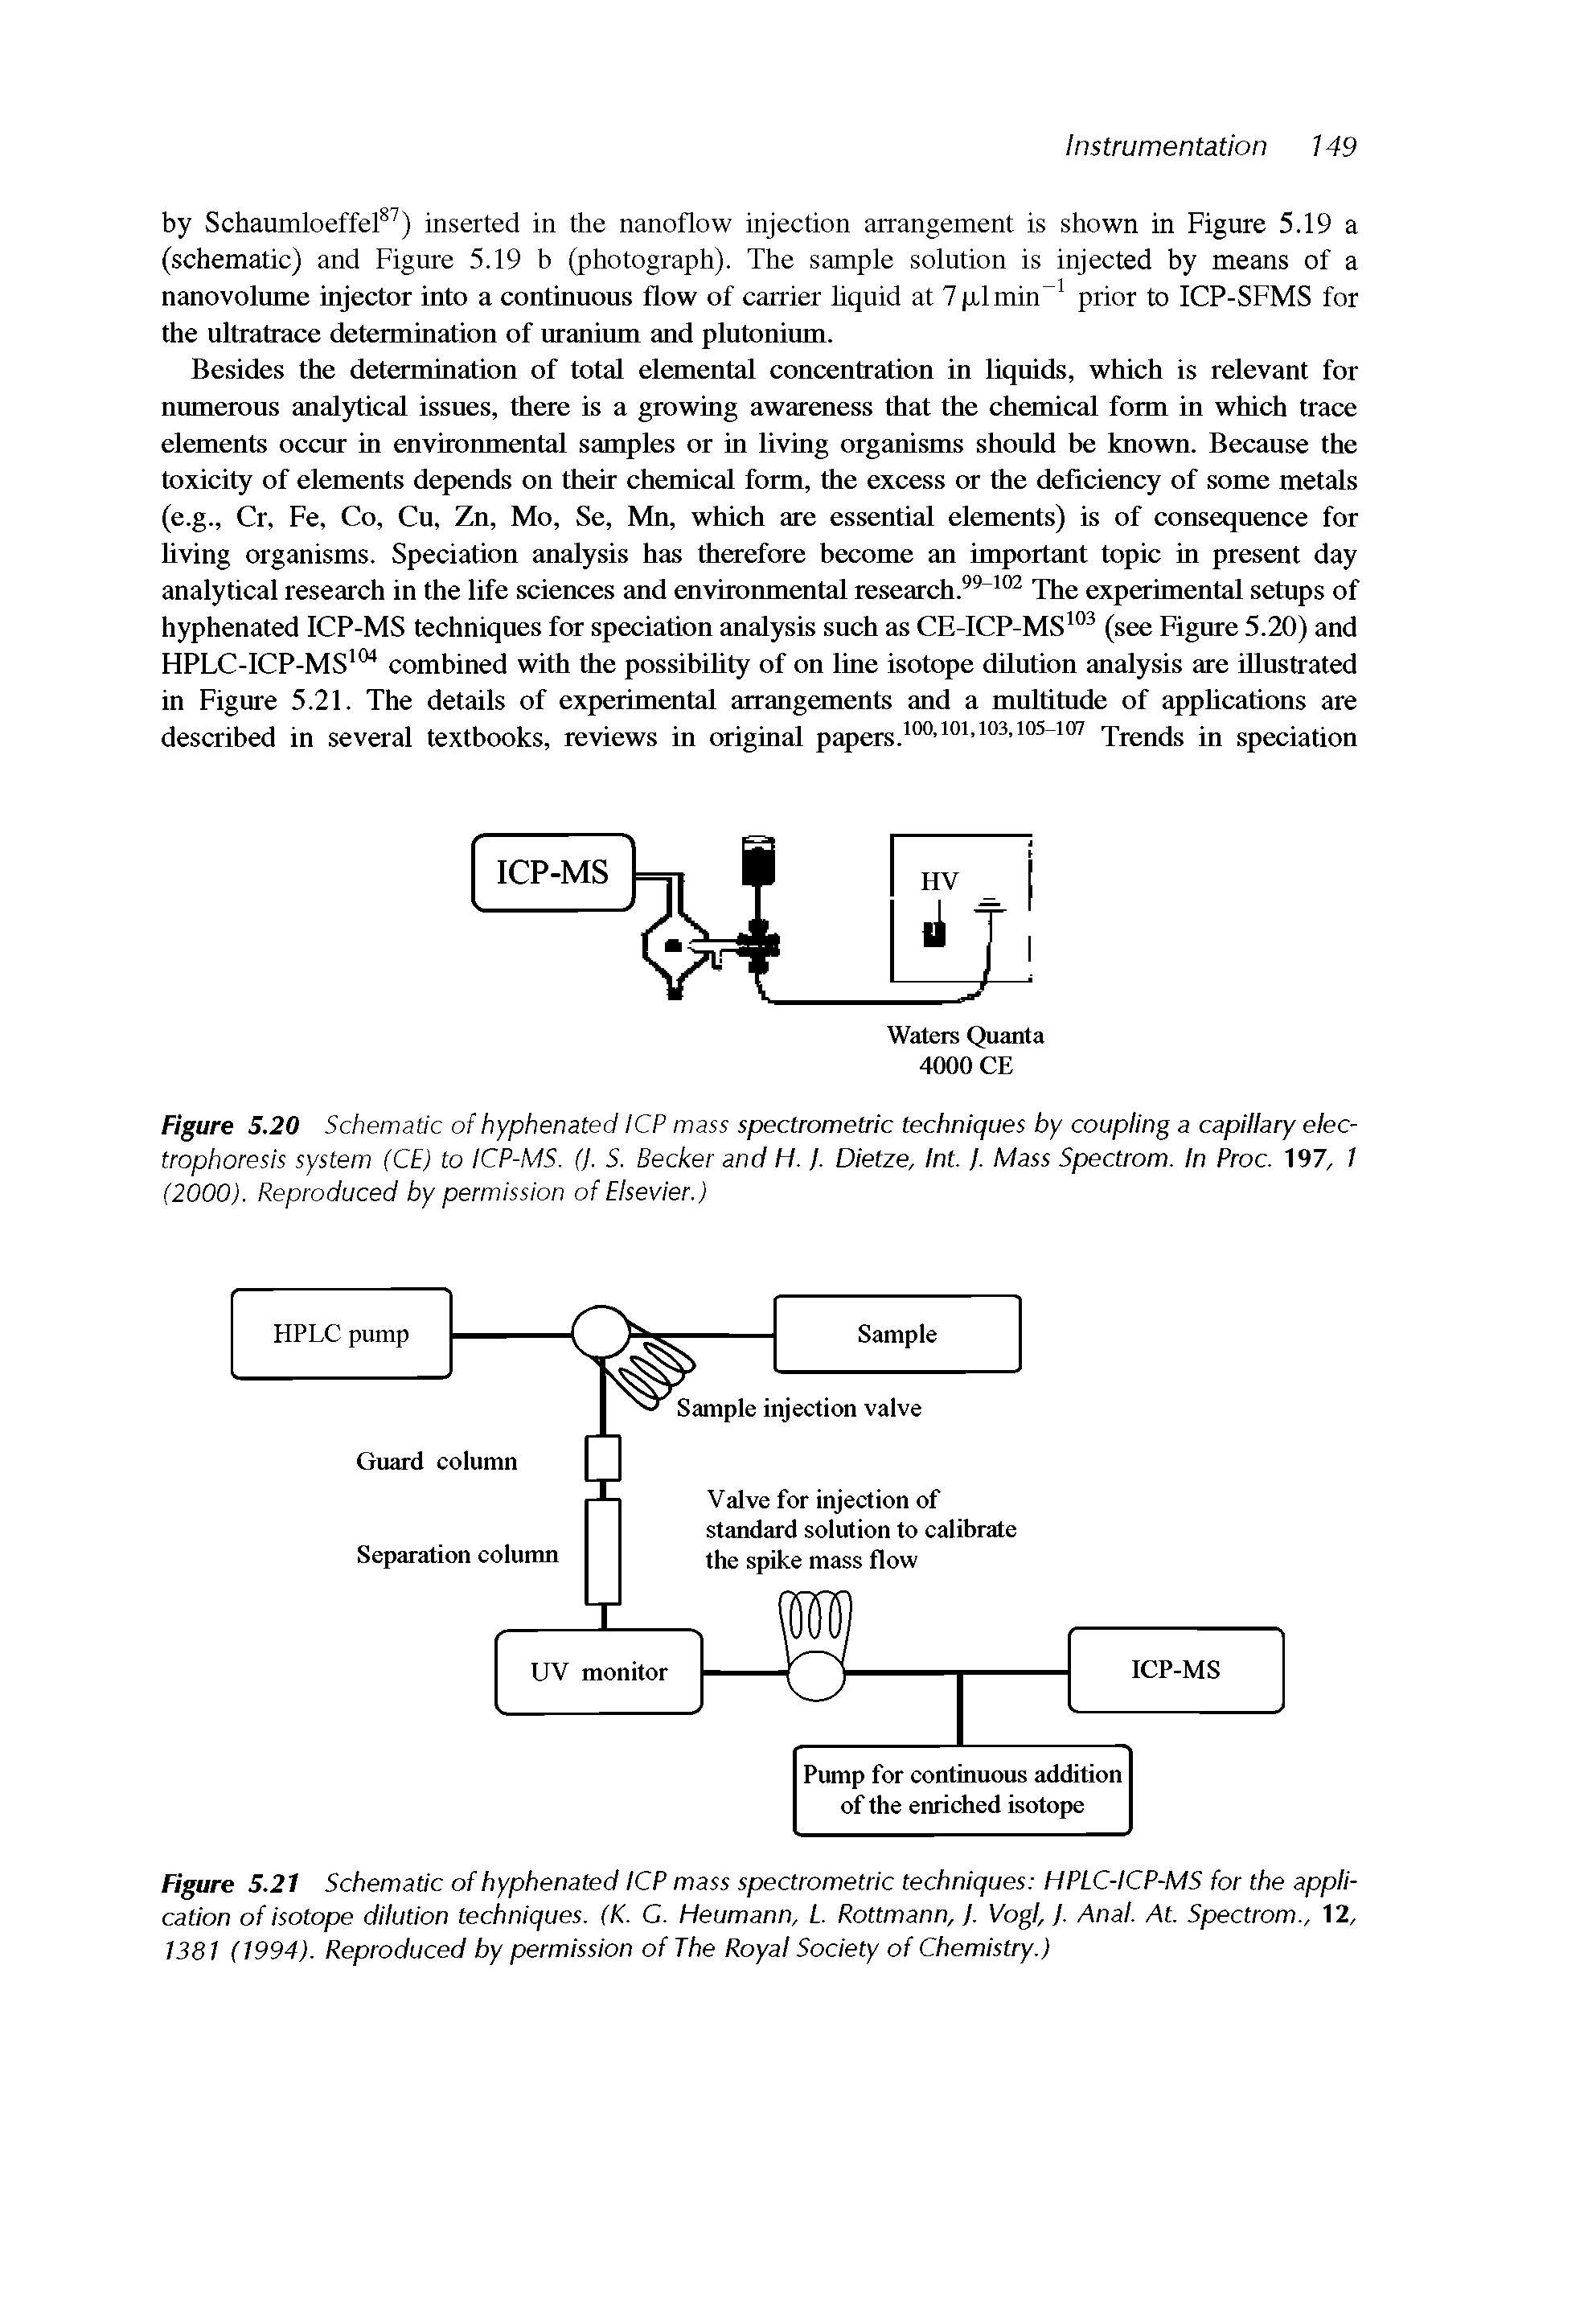 Figure 5.20 Schematic of hyphenated ICP mass spectrometric techniques by coupling a capillary electrophoresis system (CE) to ICP-MS. (I. S. Becker and H. /. Dietze, Int. /. Mass Spectrom. In Proc. 197, / (2000). Reproduced by permission of Elsevier.)...